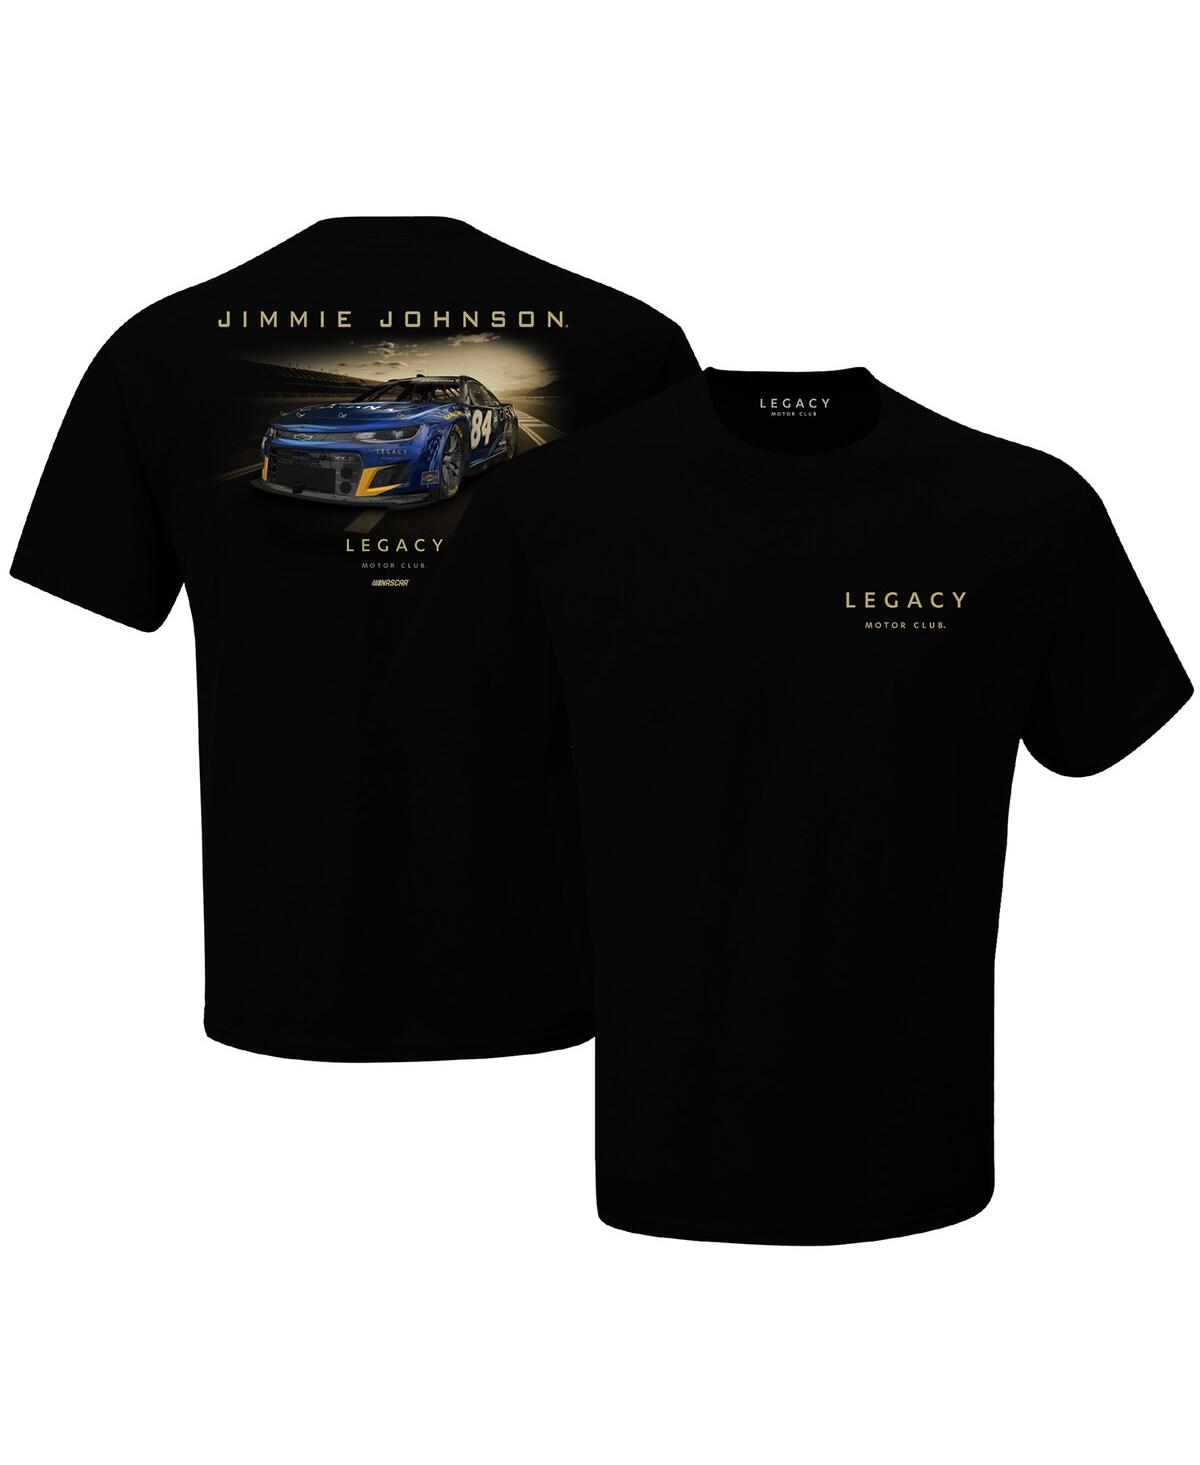 LEGACY MOTOR CLUB TEAM COLLECTION MEN'S LEGACY MOTOR CLUB TEAM COLLECTION BLACK JIMMIE JOHNSON CARVANA T-SHIRT